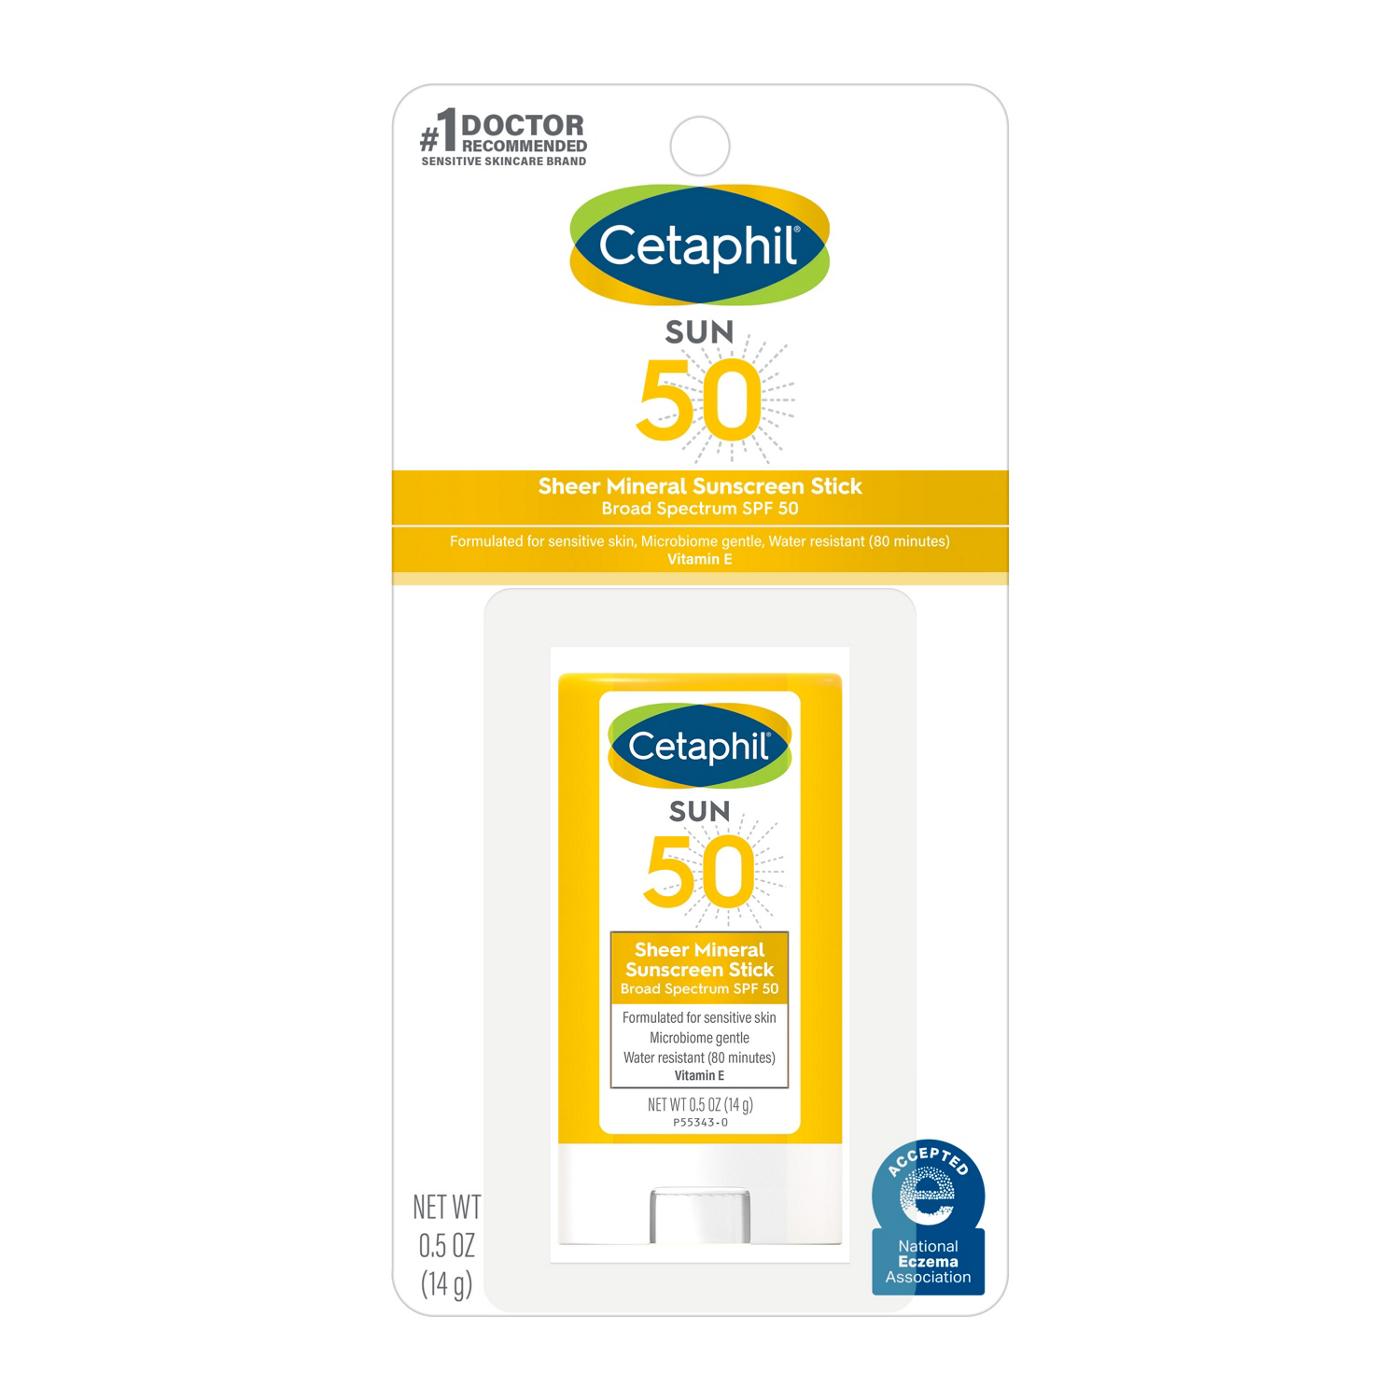 Cetaphil Sheer Mineral Sunscreen Stick SPF 50; image 1 of 3